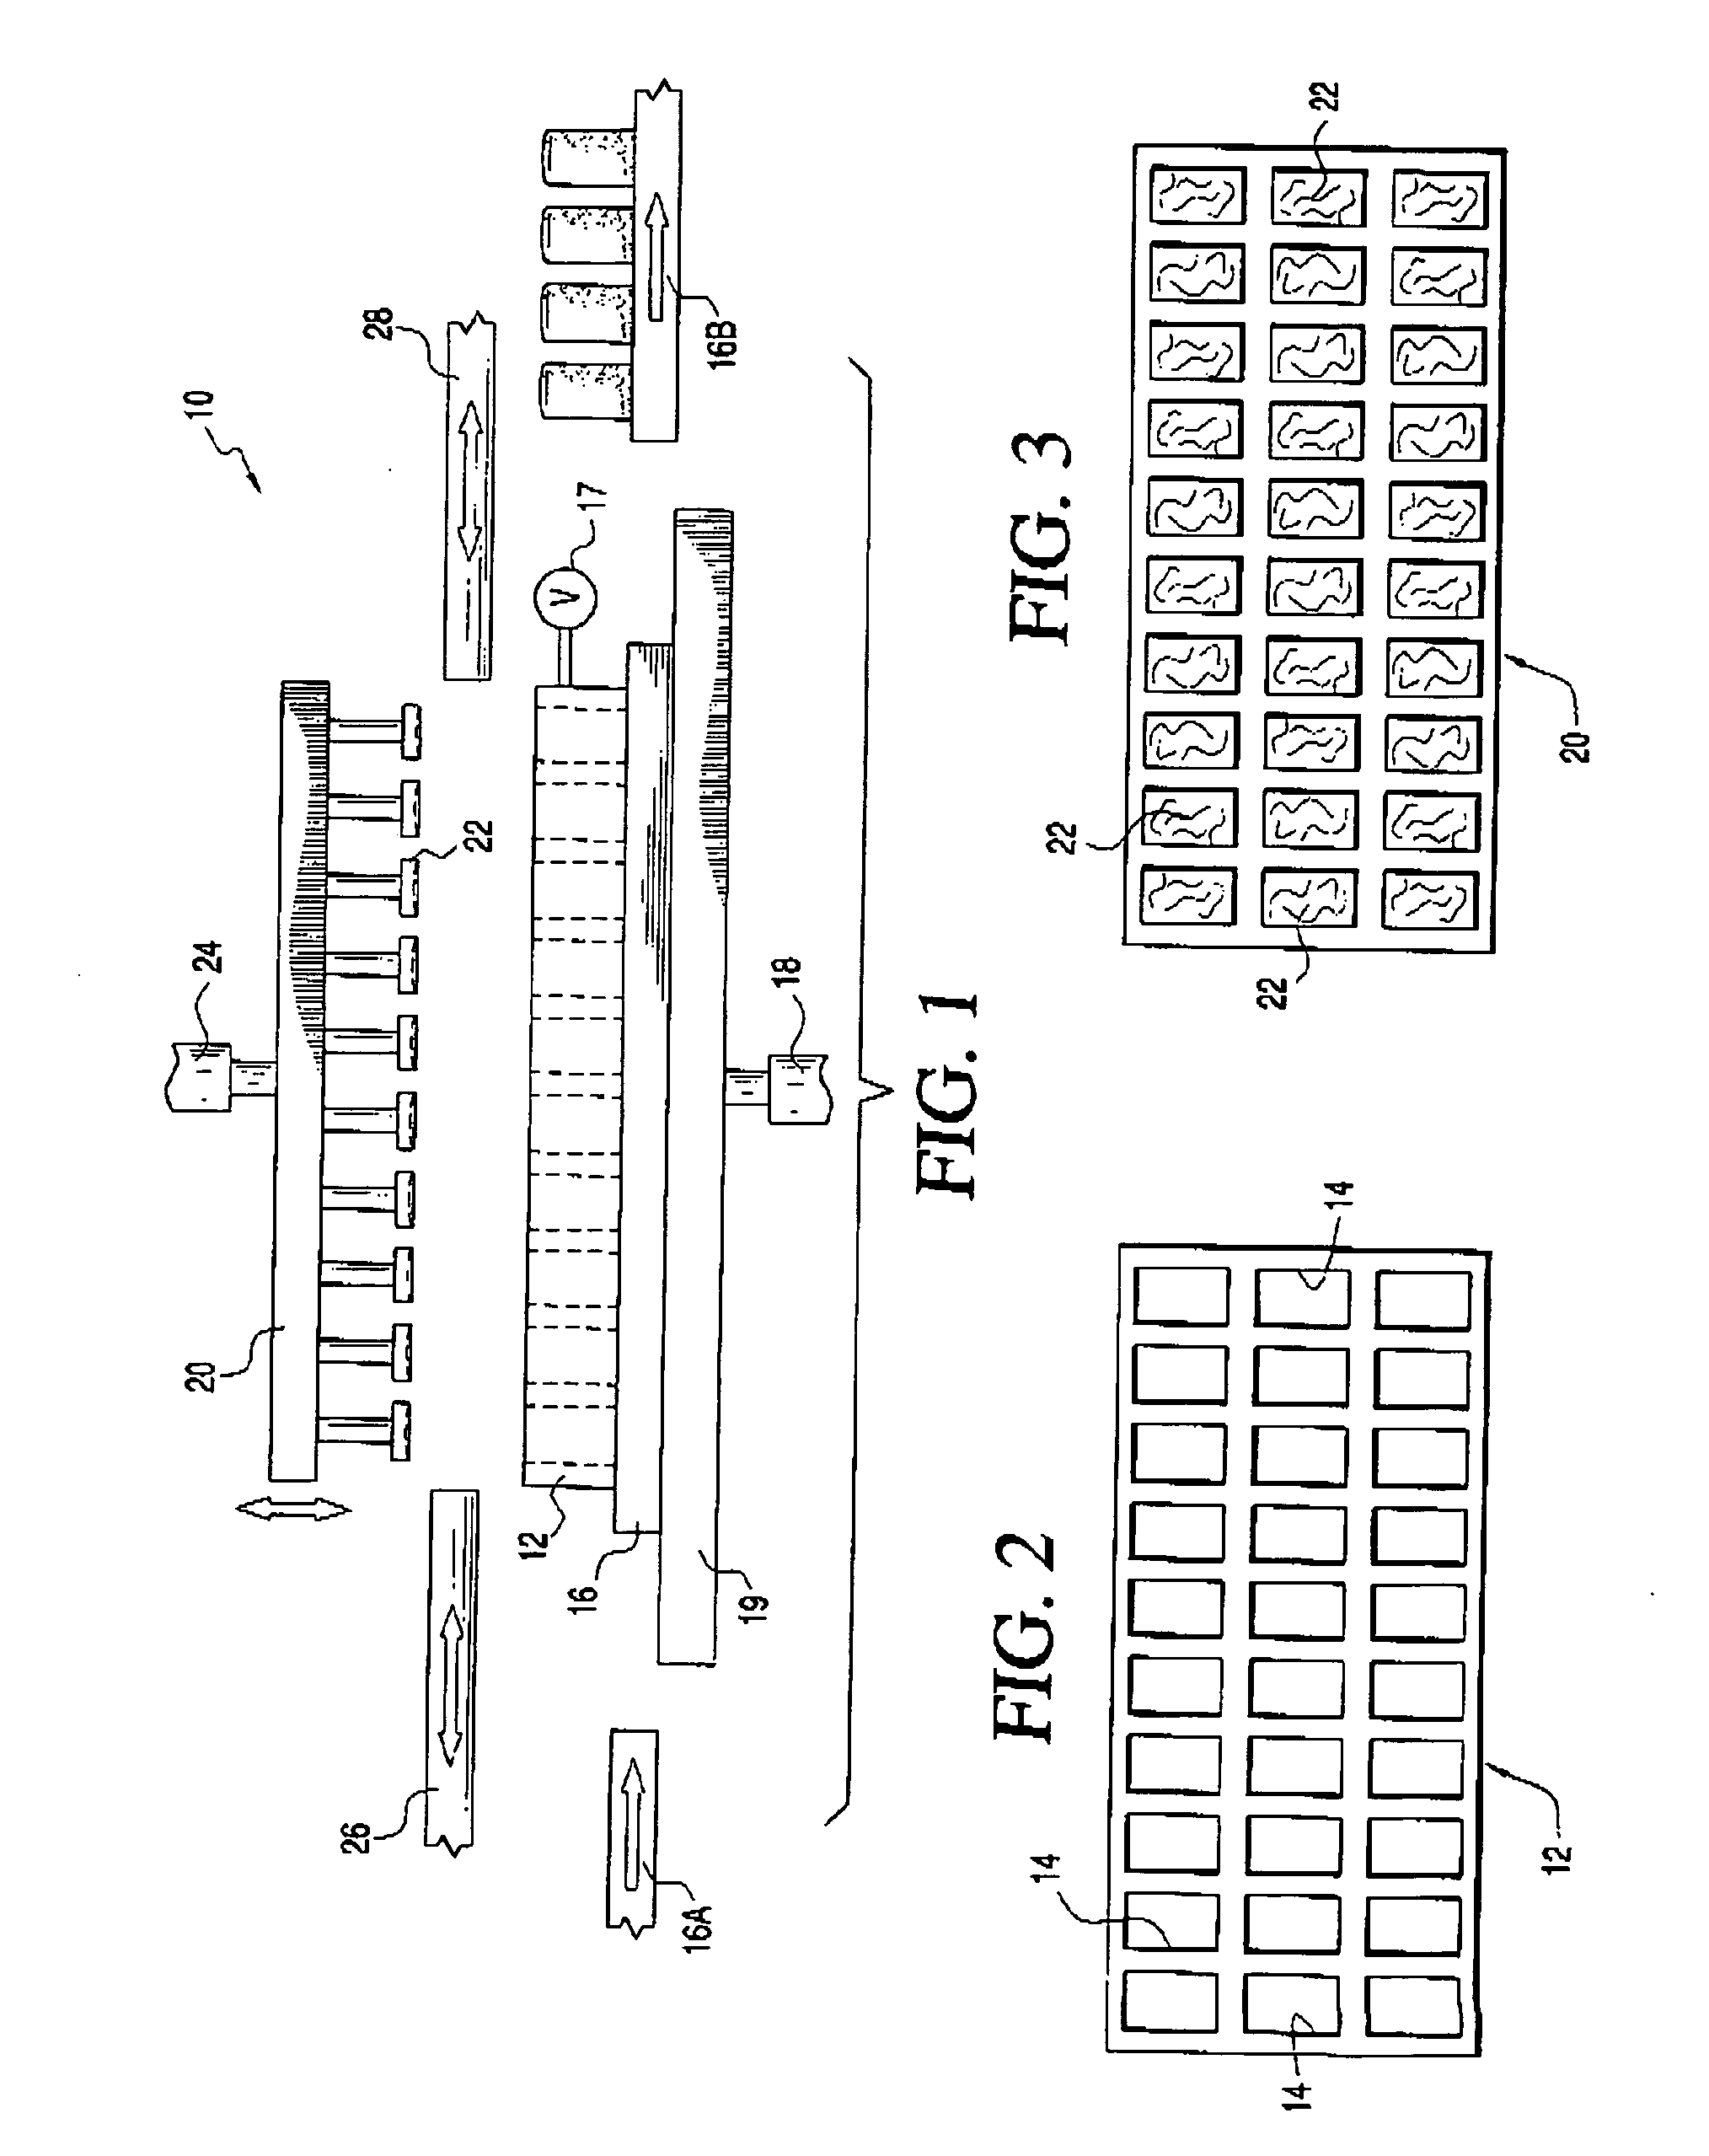 Paving block and molding process therefor